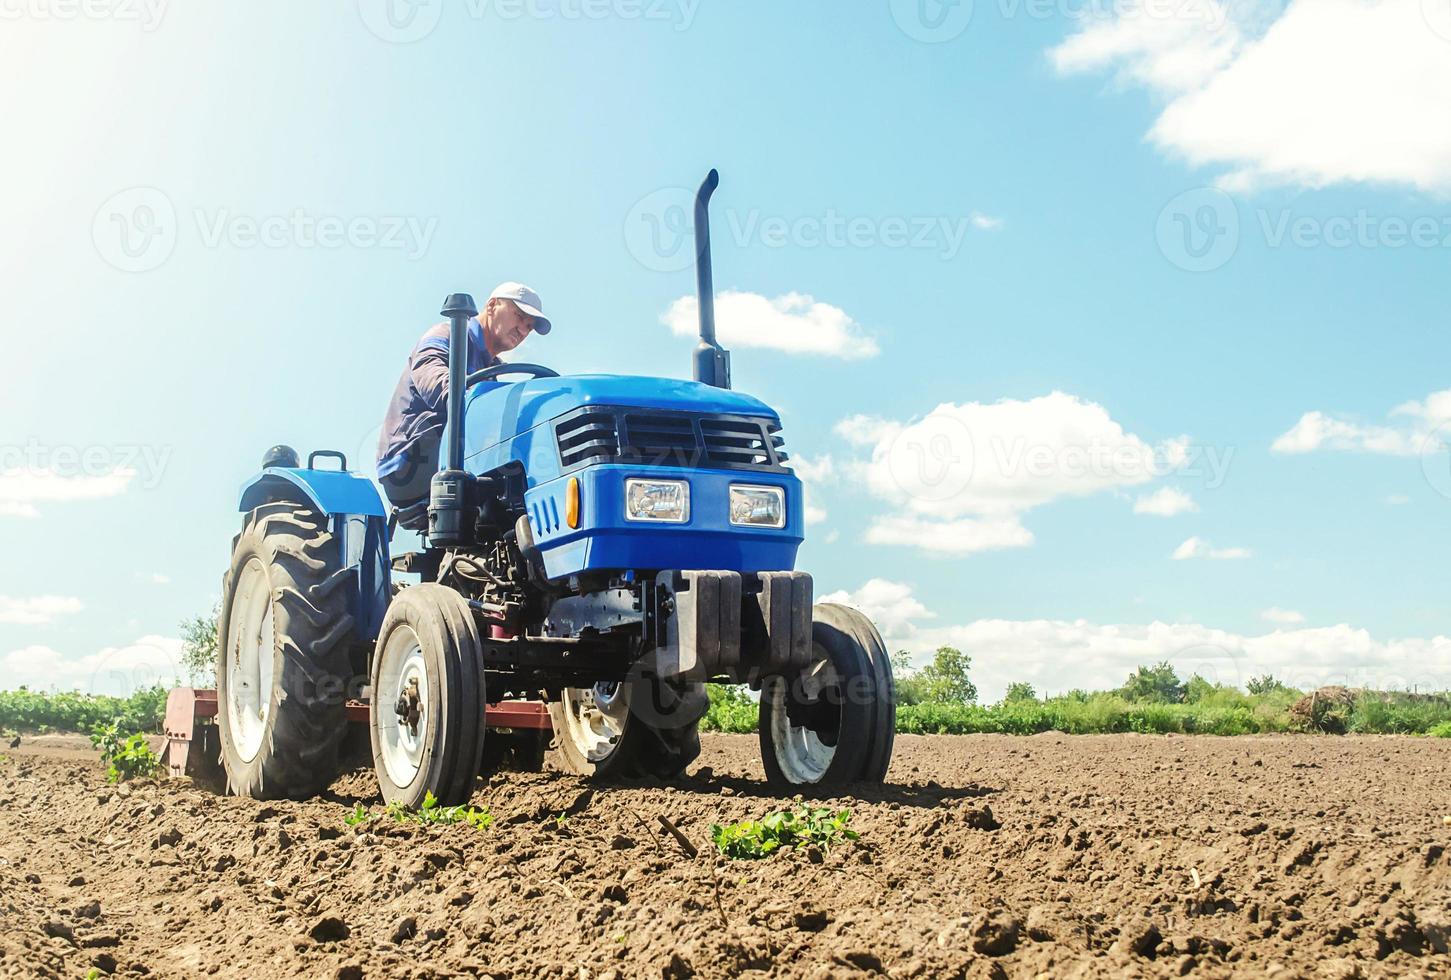 The farmer works on a tractor. Loosening the surface, cultivating the land for further planting. Grinding and loosening soil, removing plants roots from last harvest. Cultivation technology equipment. photo